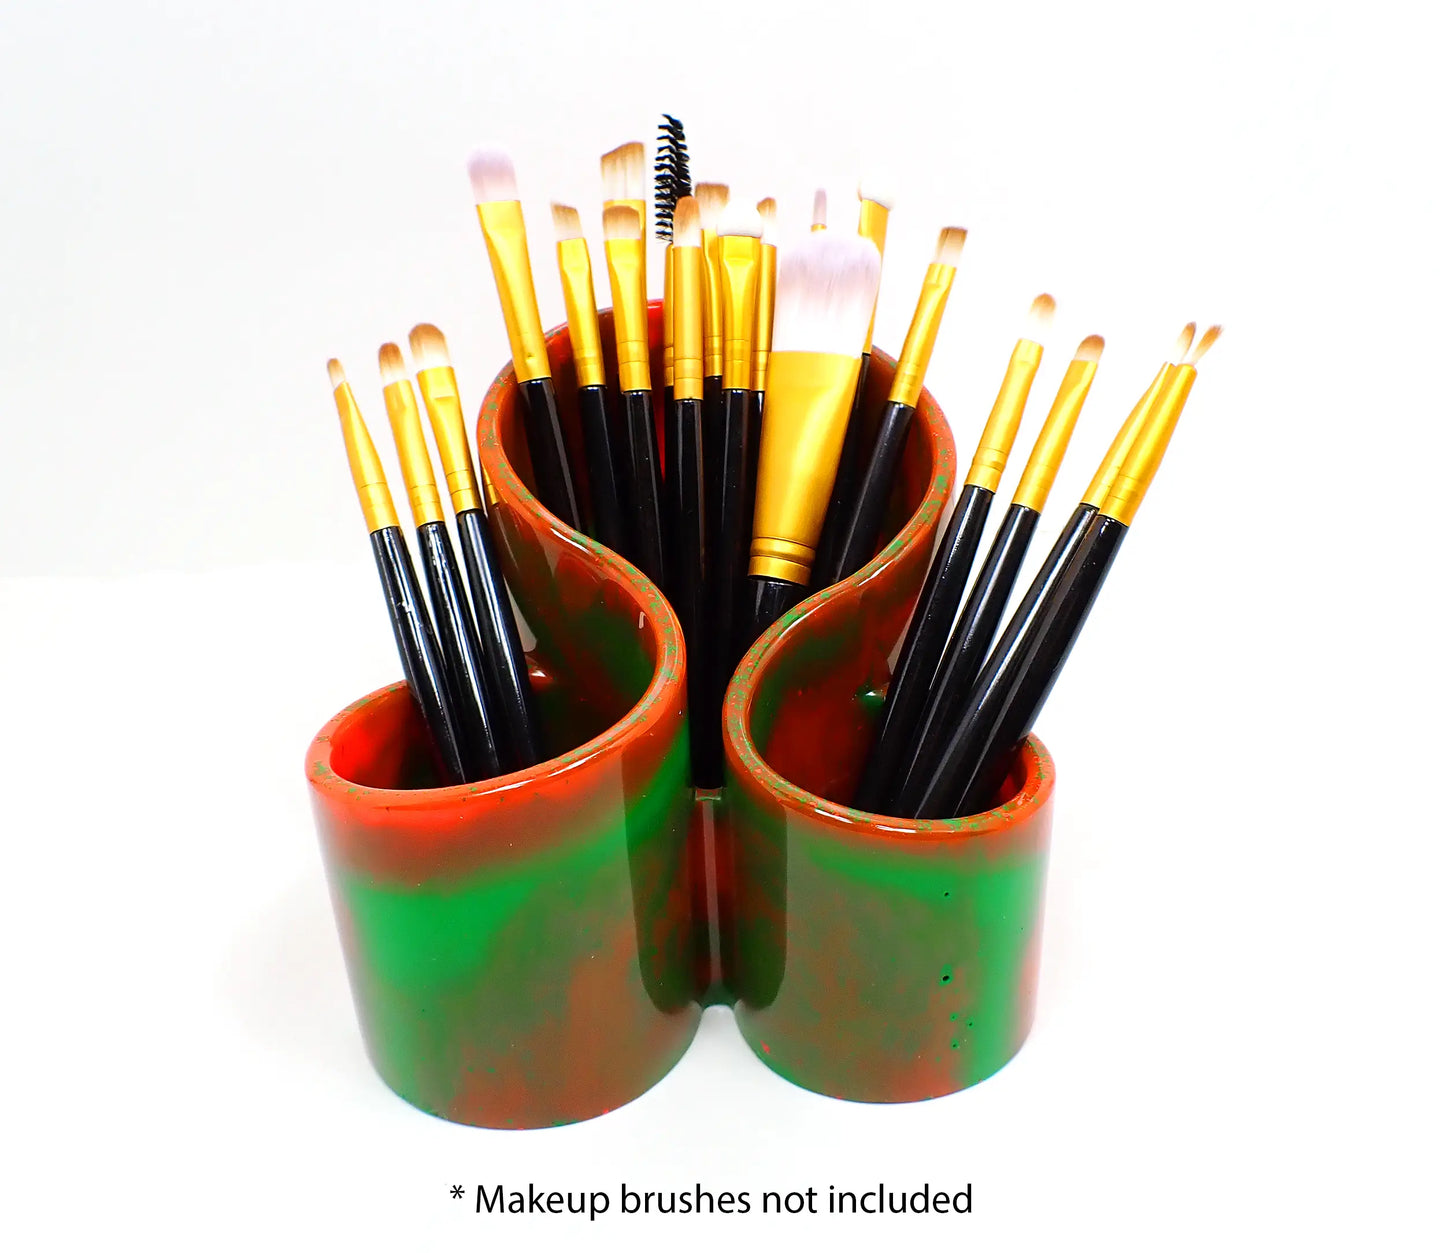 Photo showing how the handmade neon makeup brush holder holds makeup brushes. At the bottom of the photo it says "Makeup brushes not included."